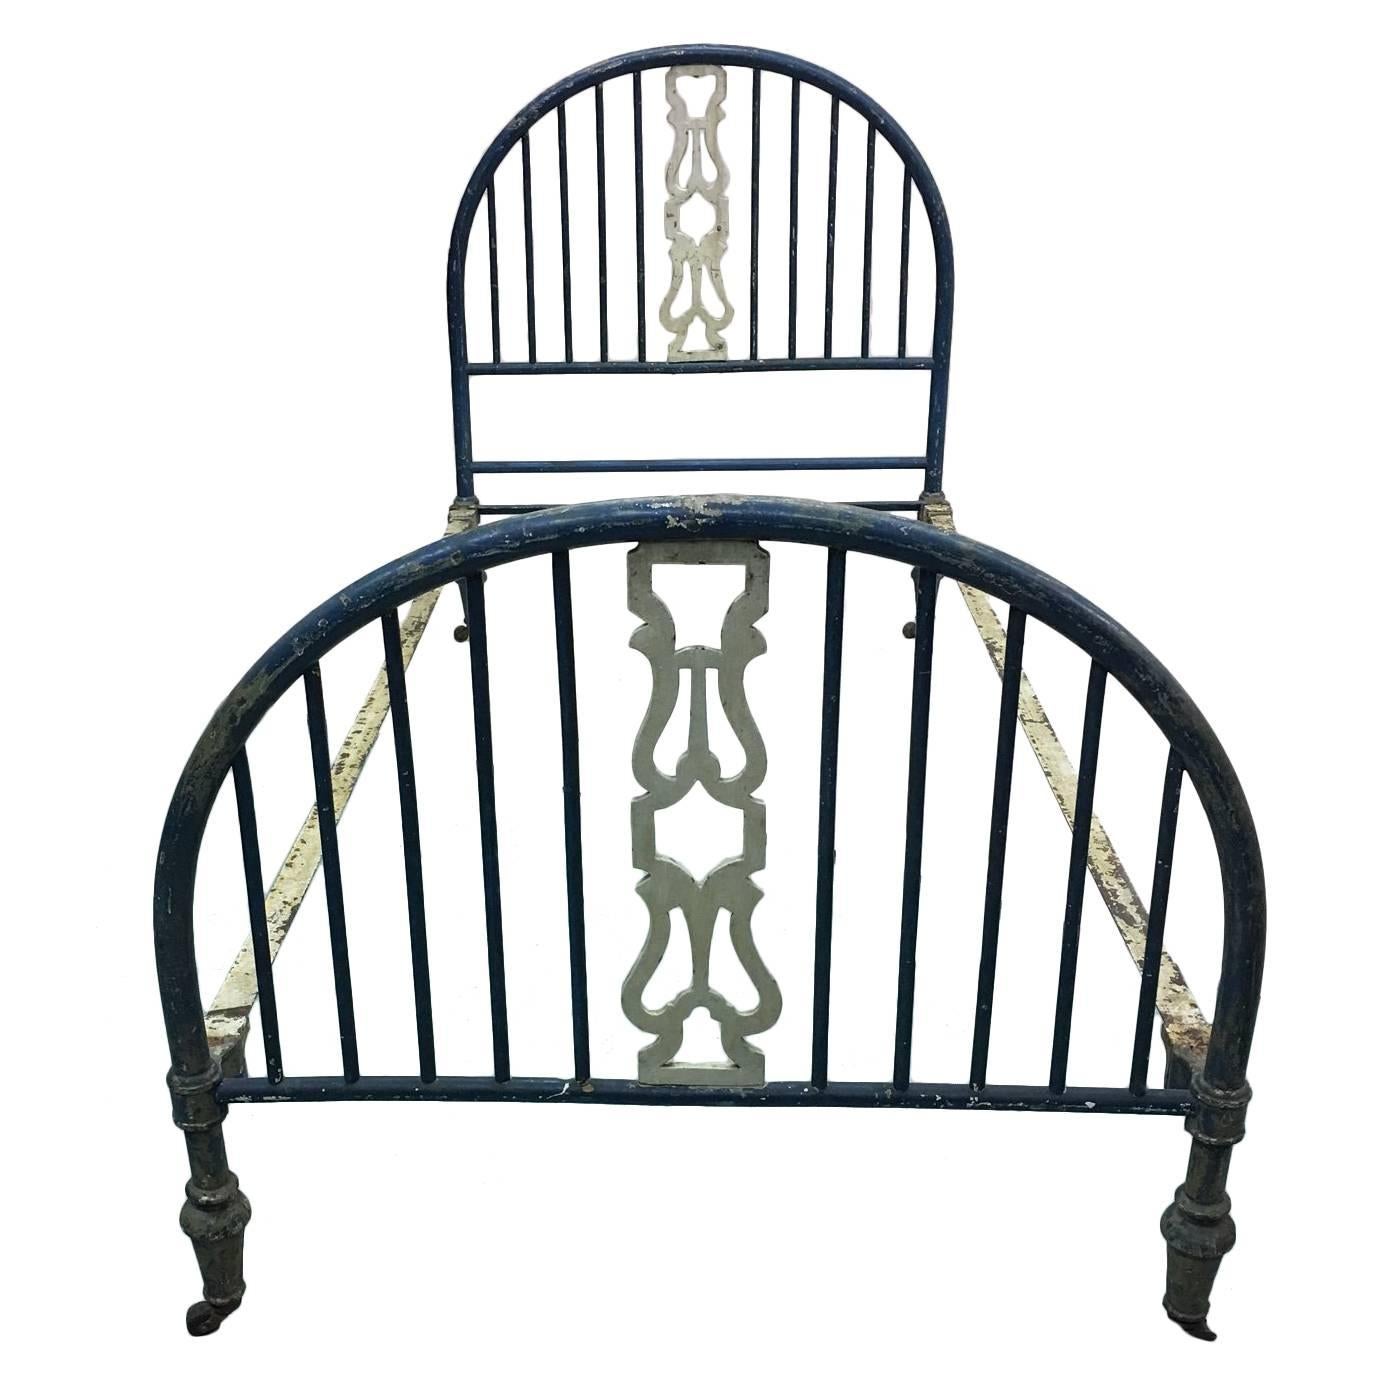 French 19th Century Modern Neoclassical Painted Iron Daybed or Single Bed